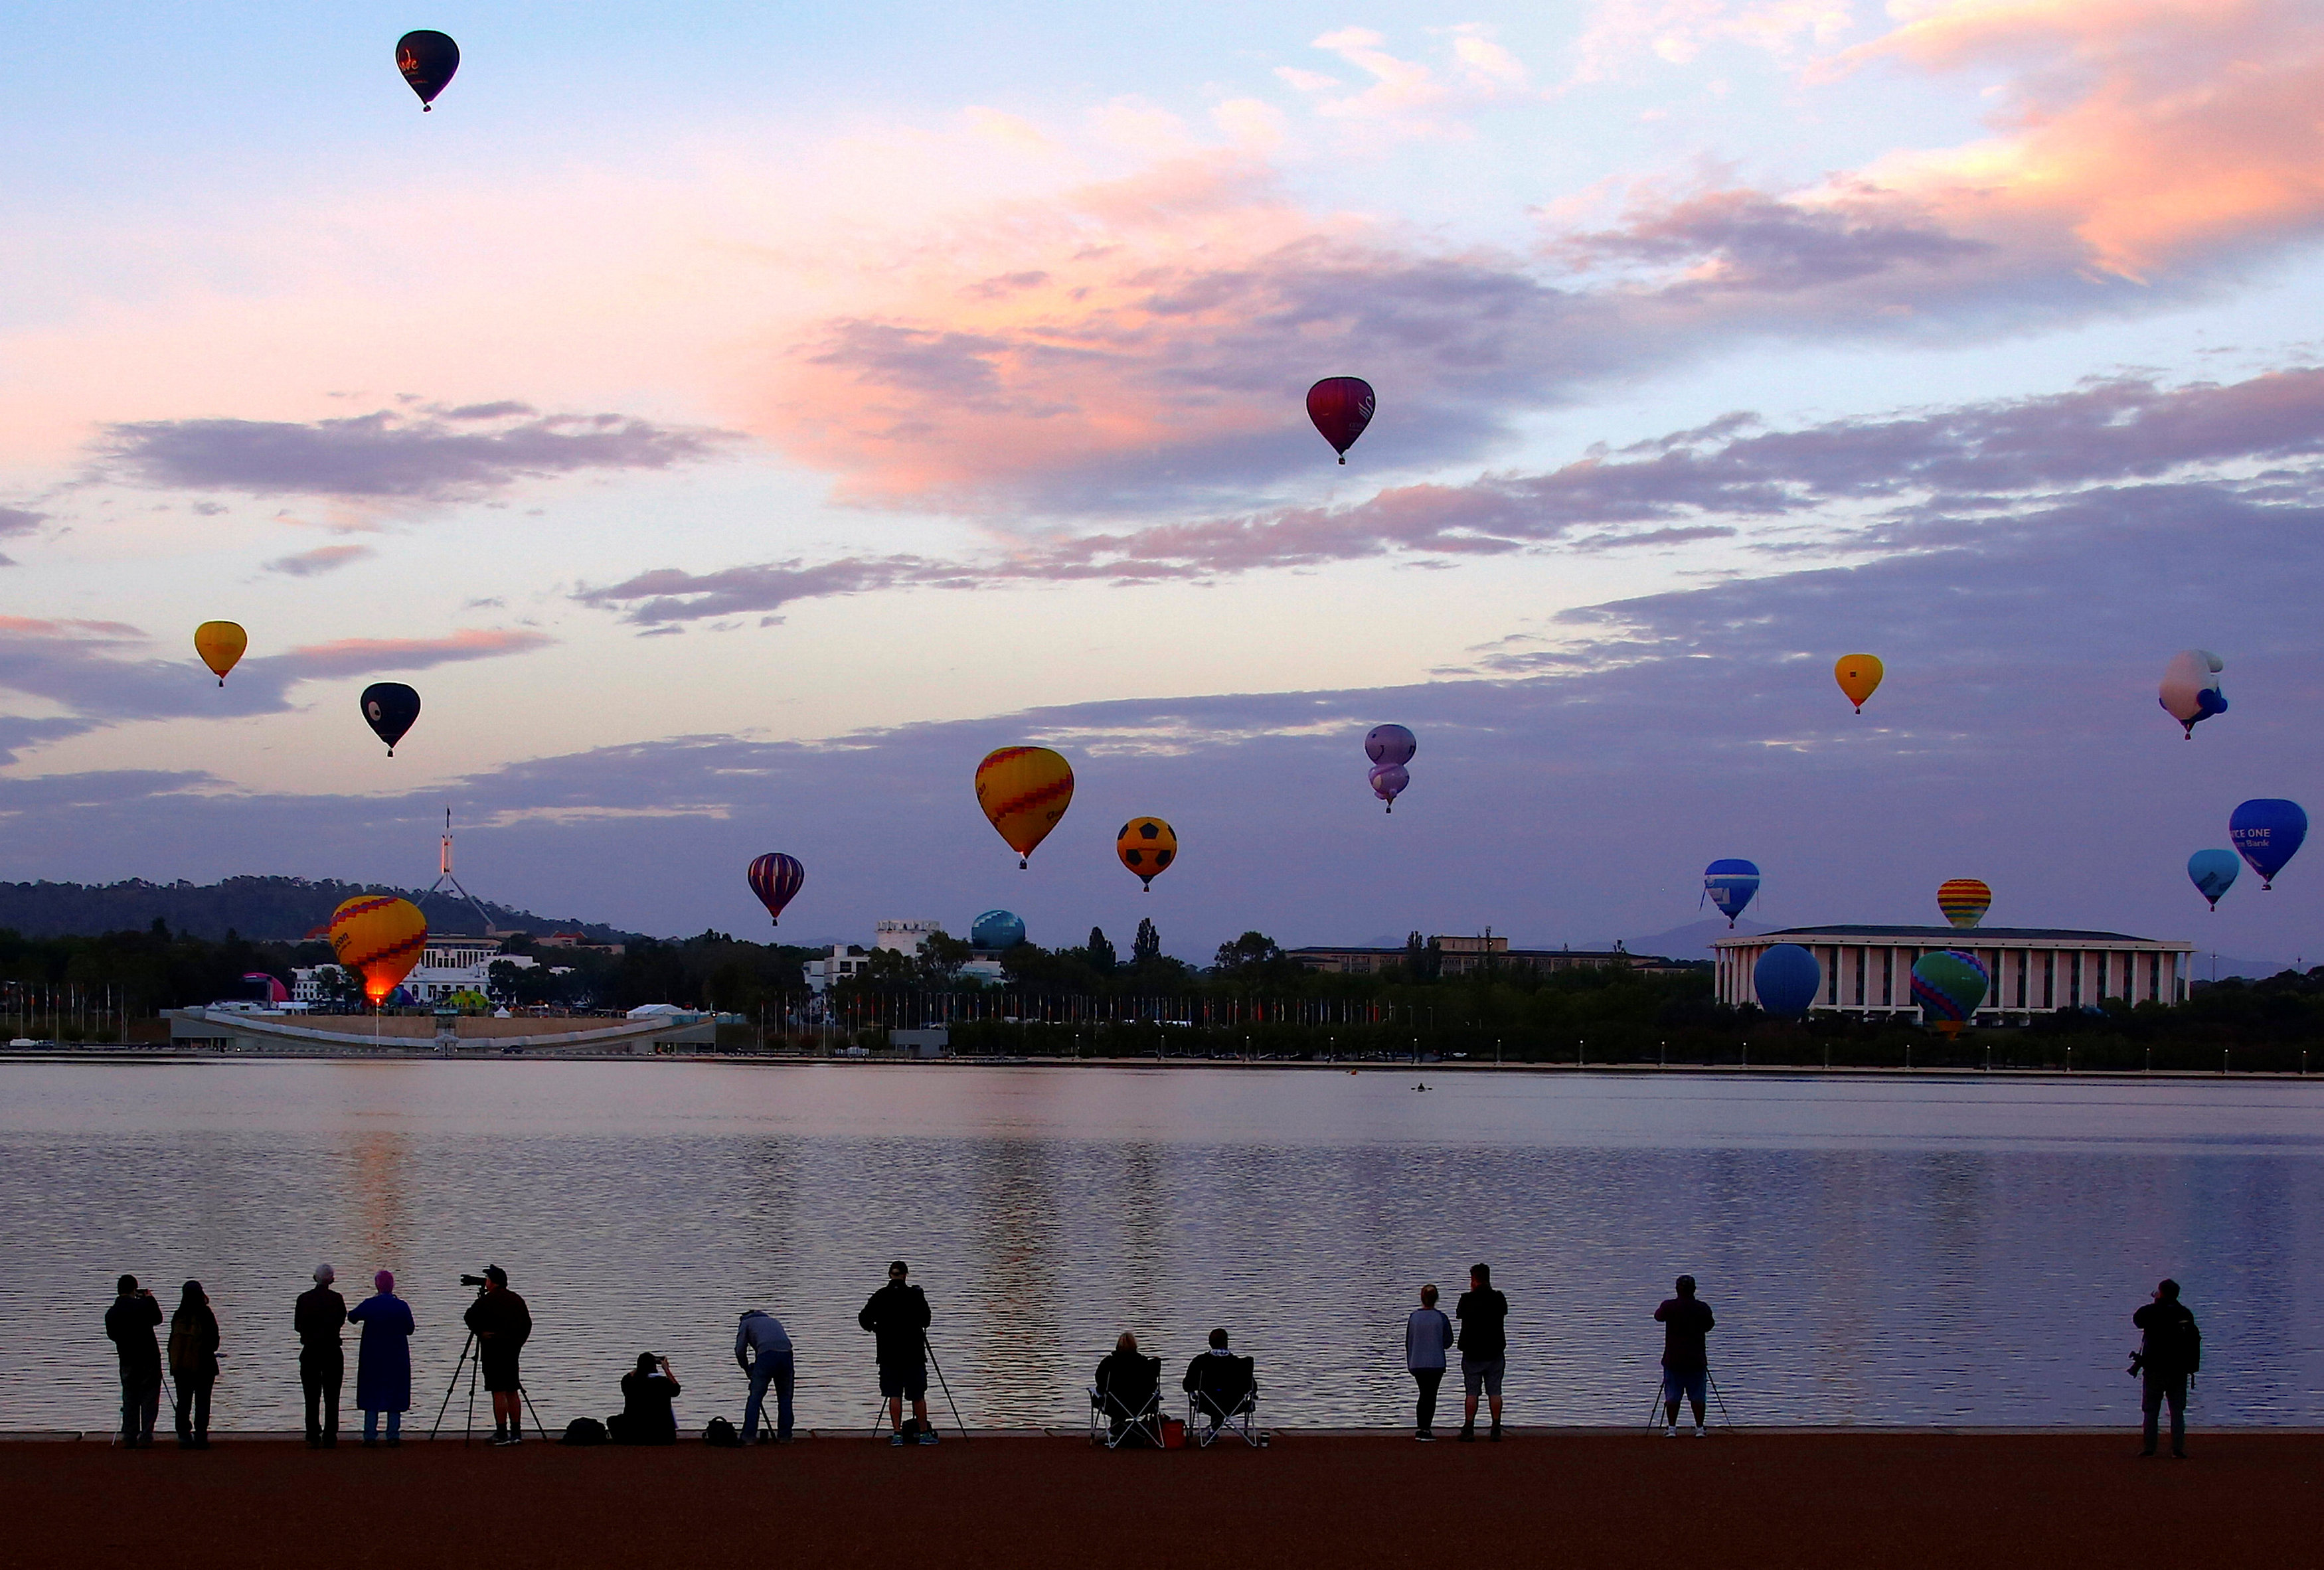 In pictures: Canberra Balloon Festival